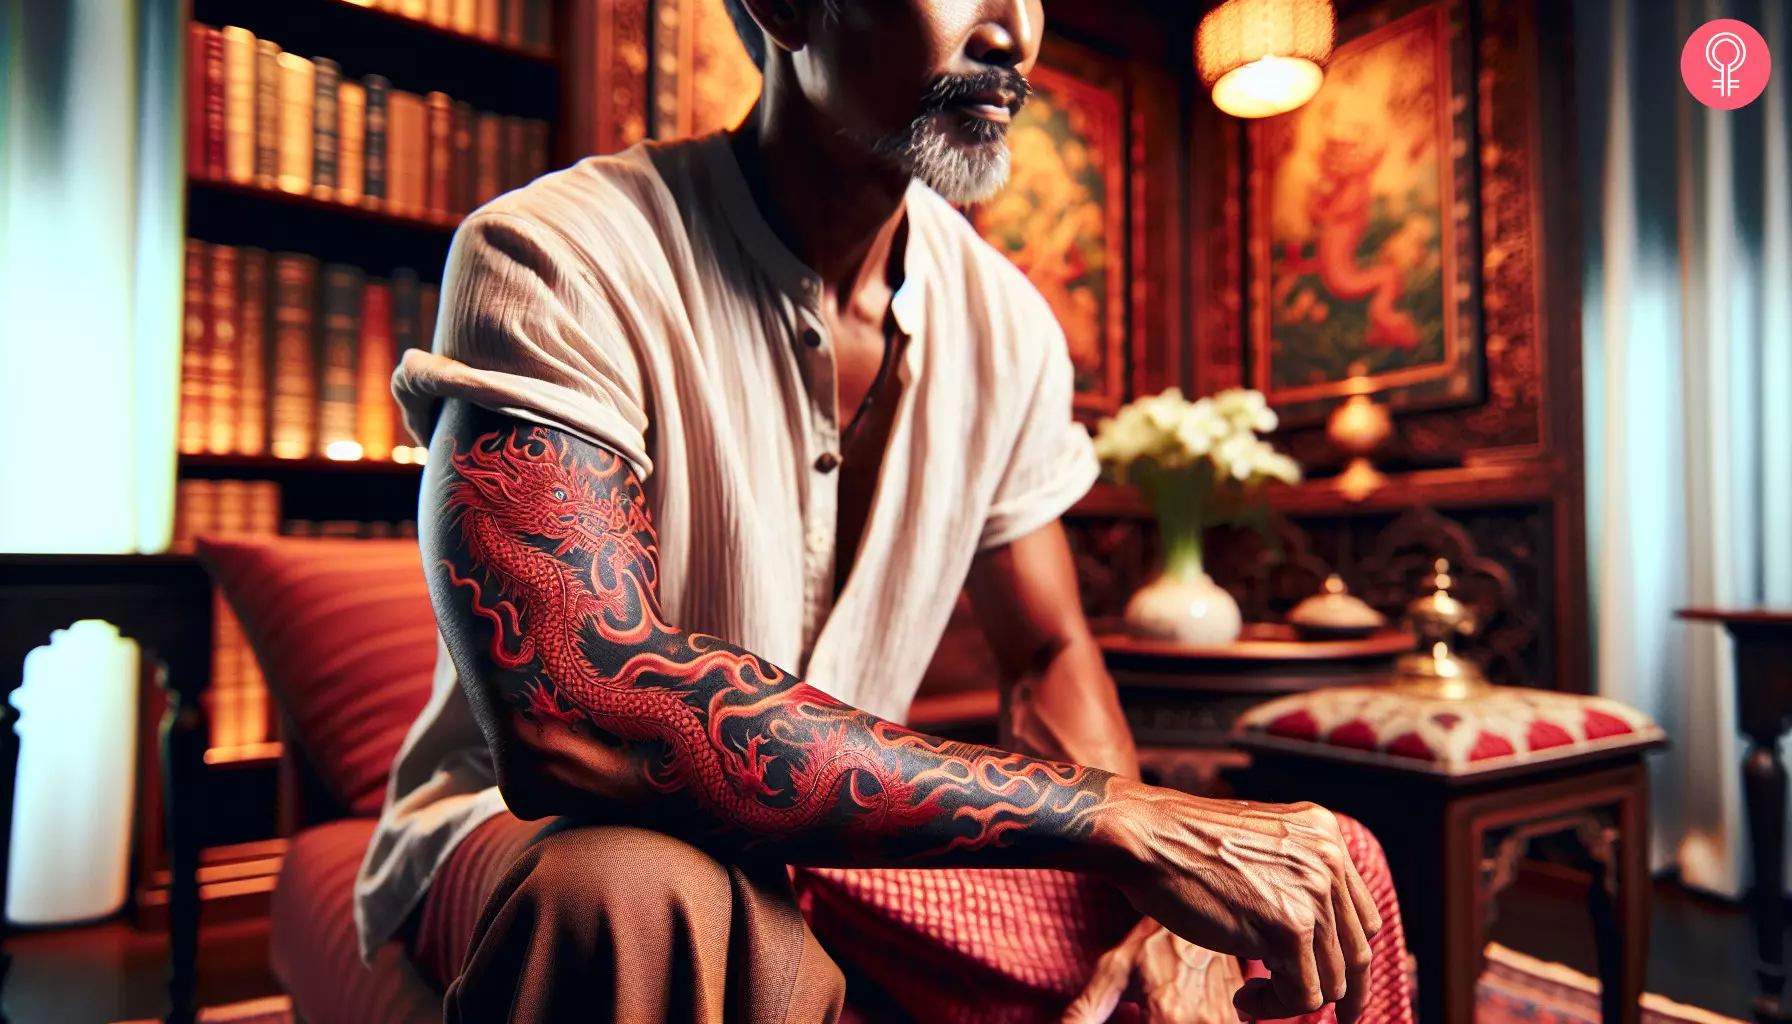 A red and black dragon sleeve tattoo